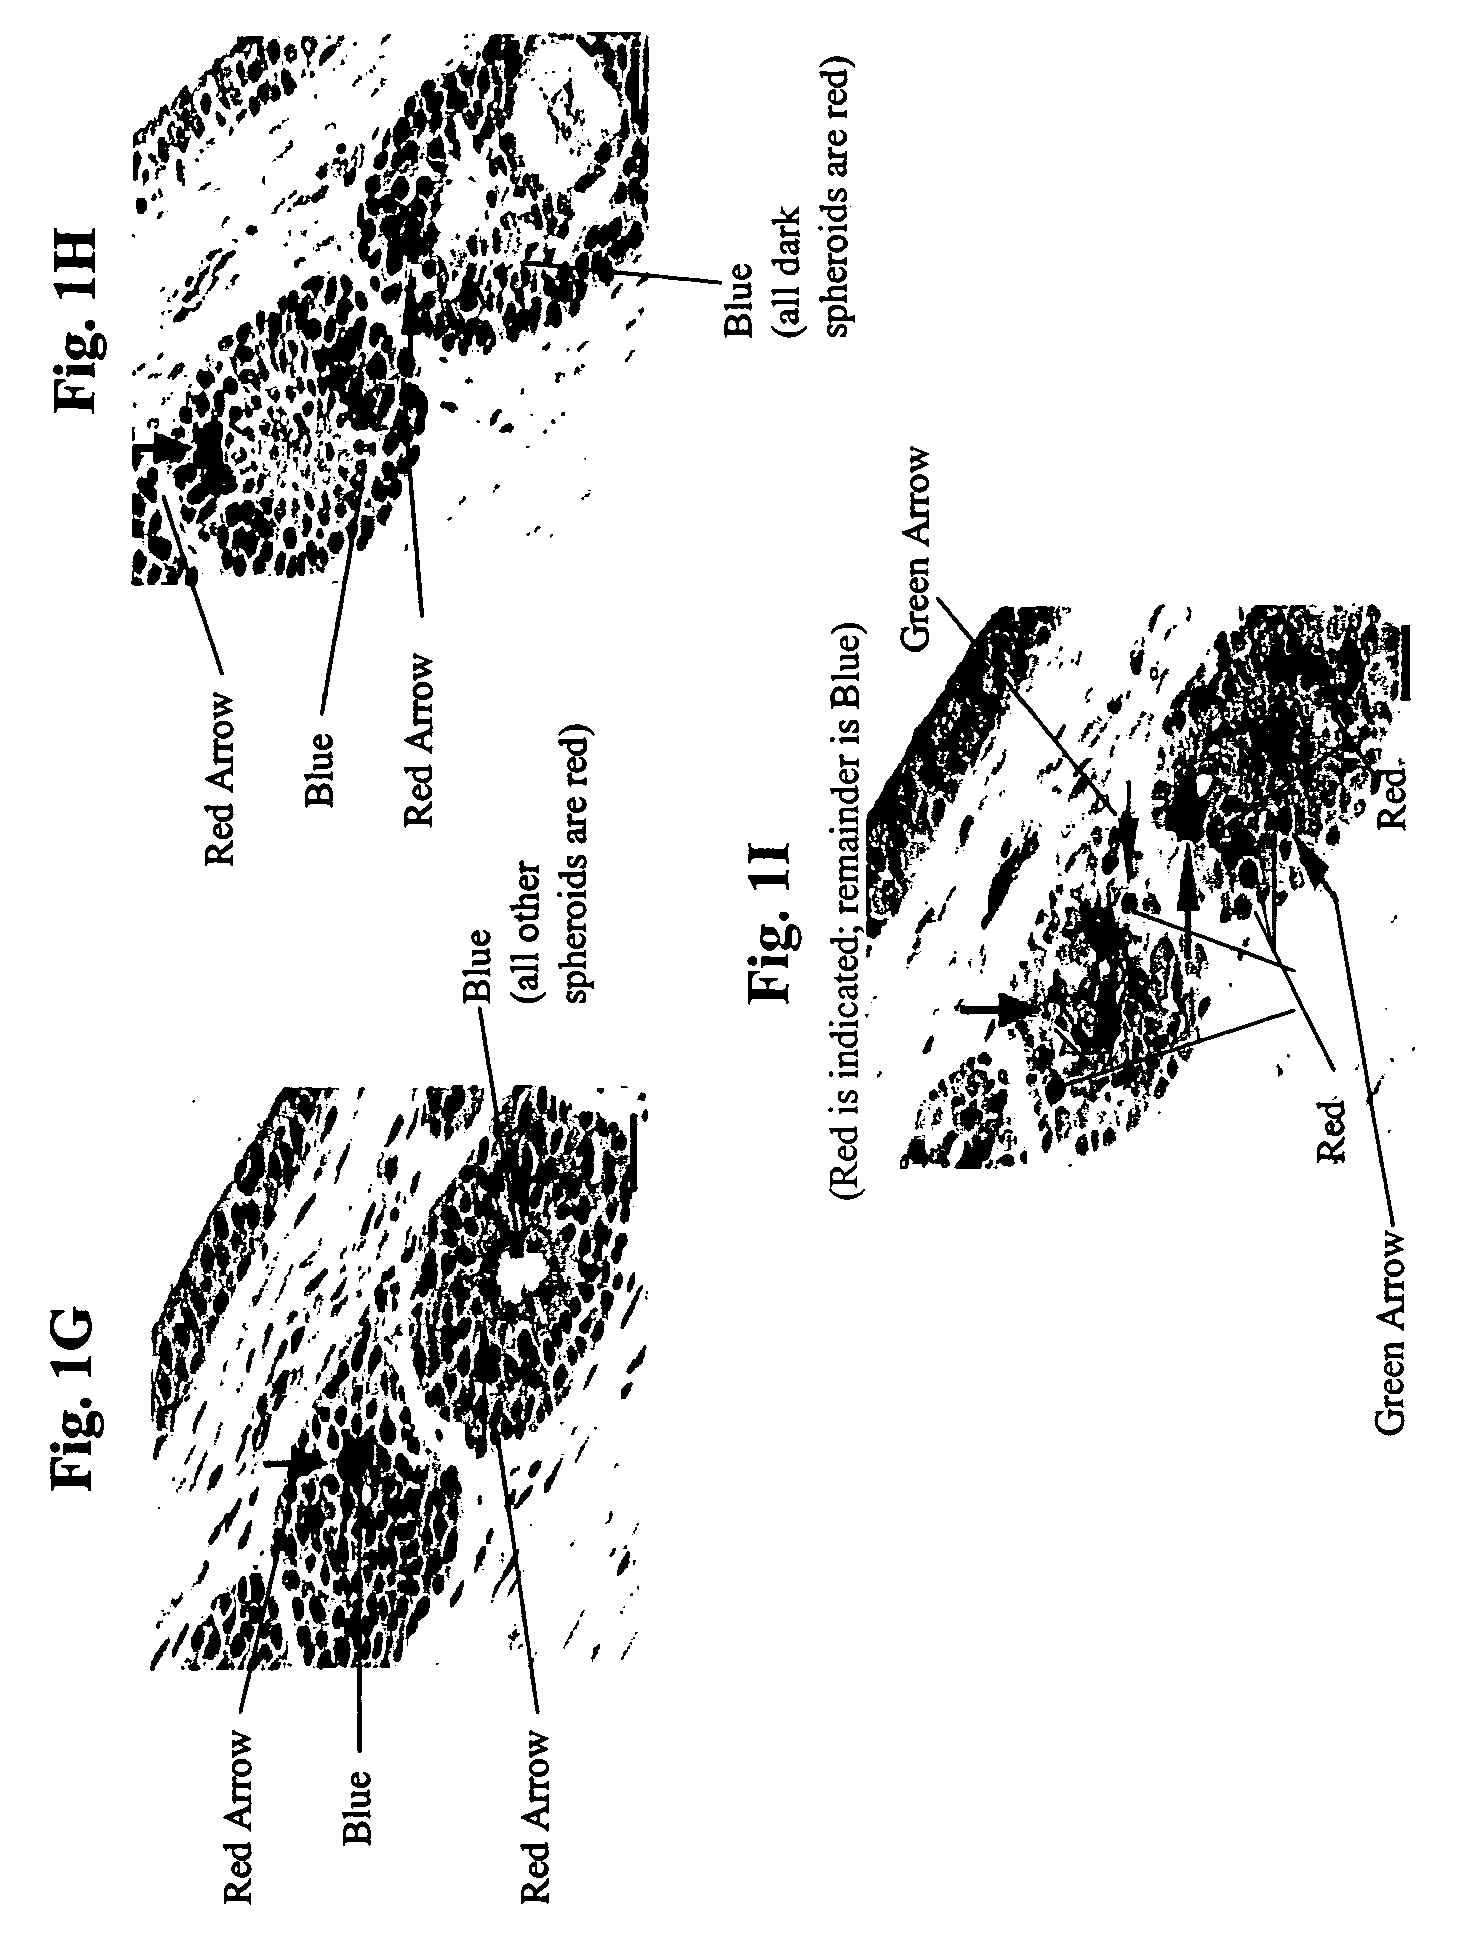 Method for treating prostate conditions